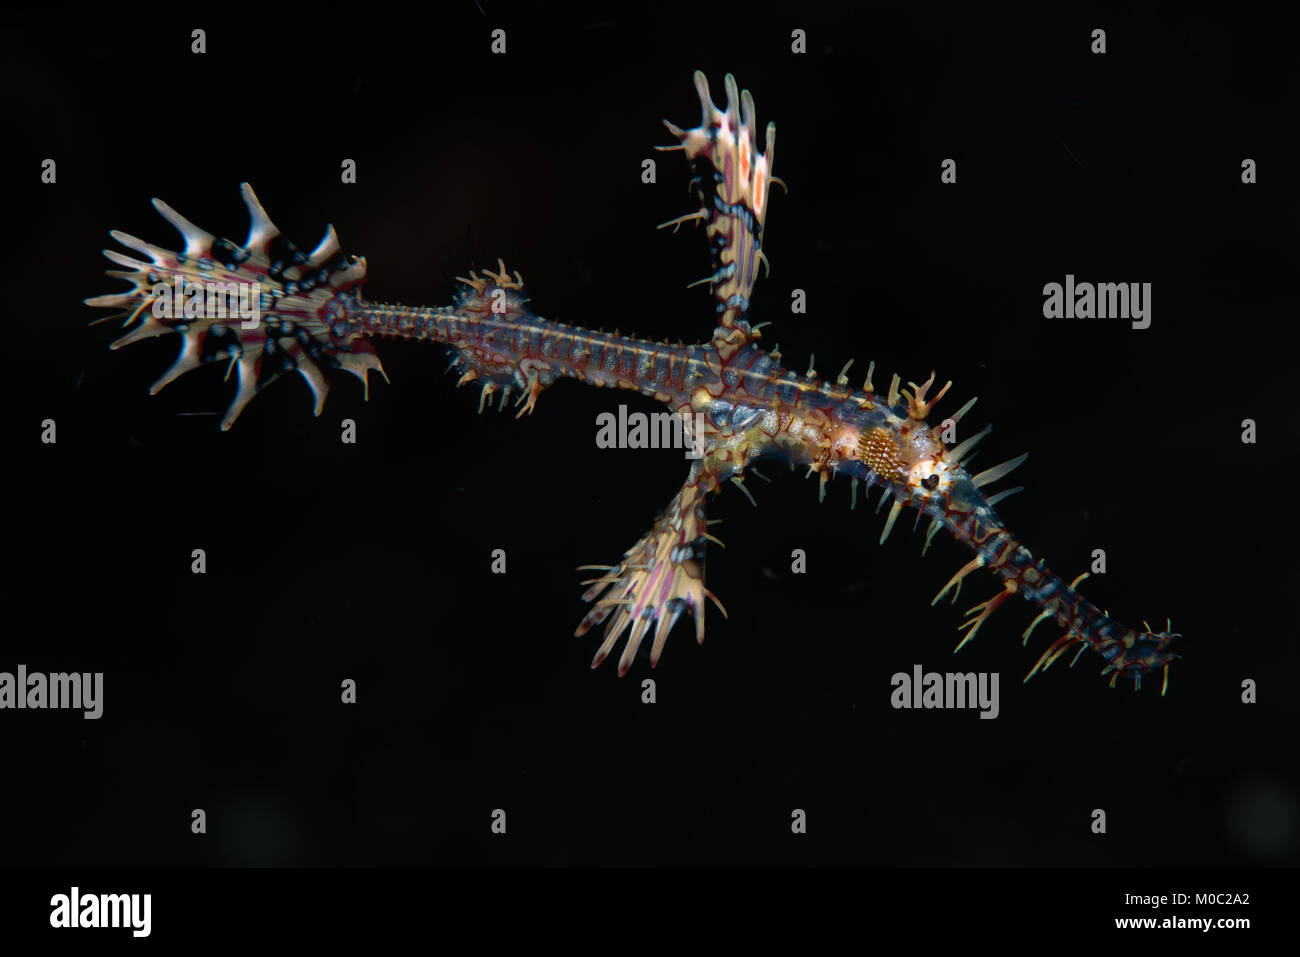 A yellow and still transparent ornate ghost pipefish on a perfect black background photographed by Sangeang volcano off Sumbawa island, Indonesia Stock Photo